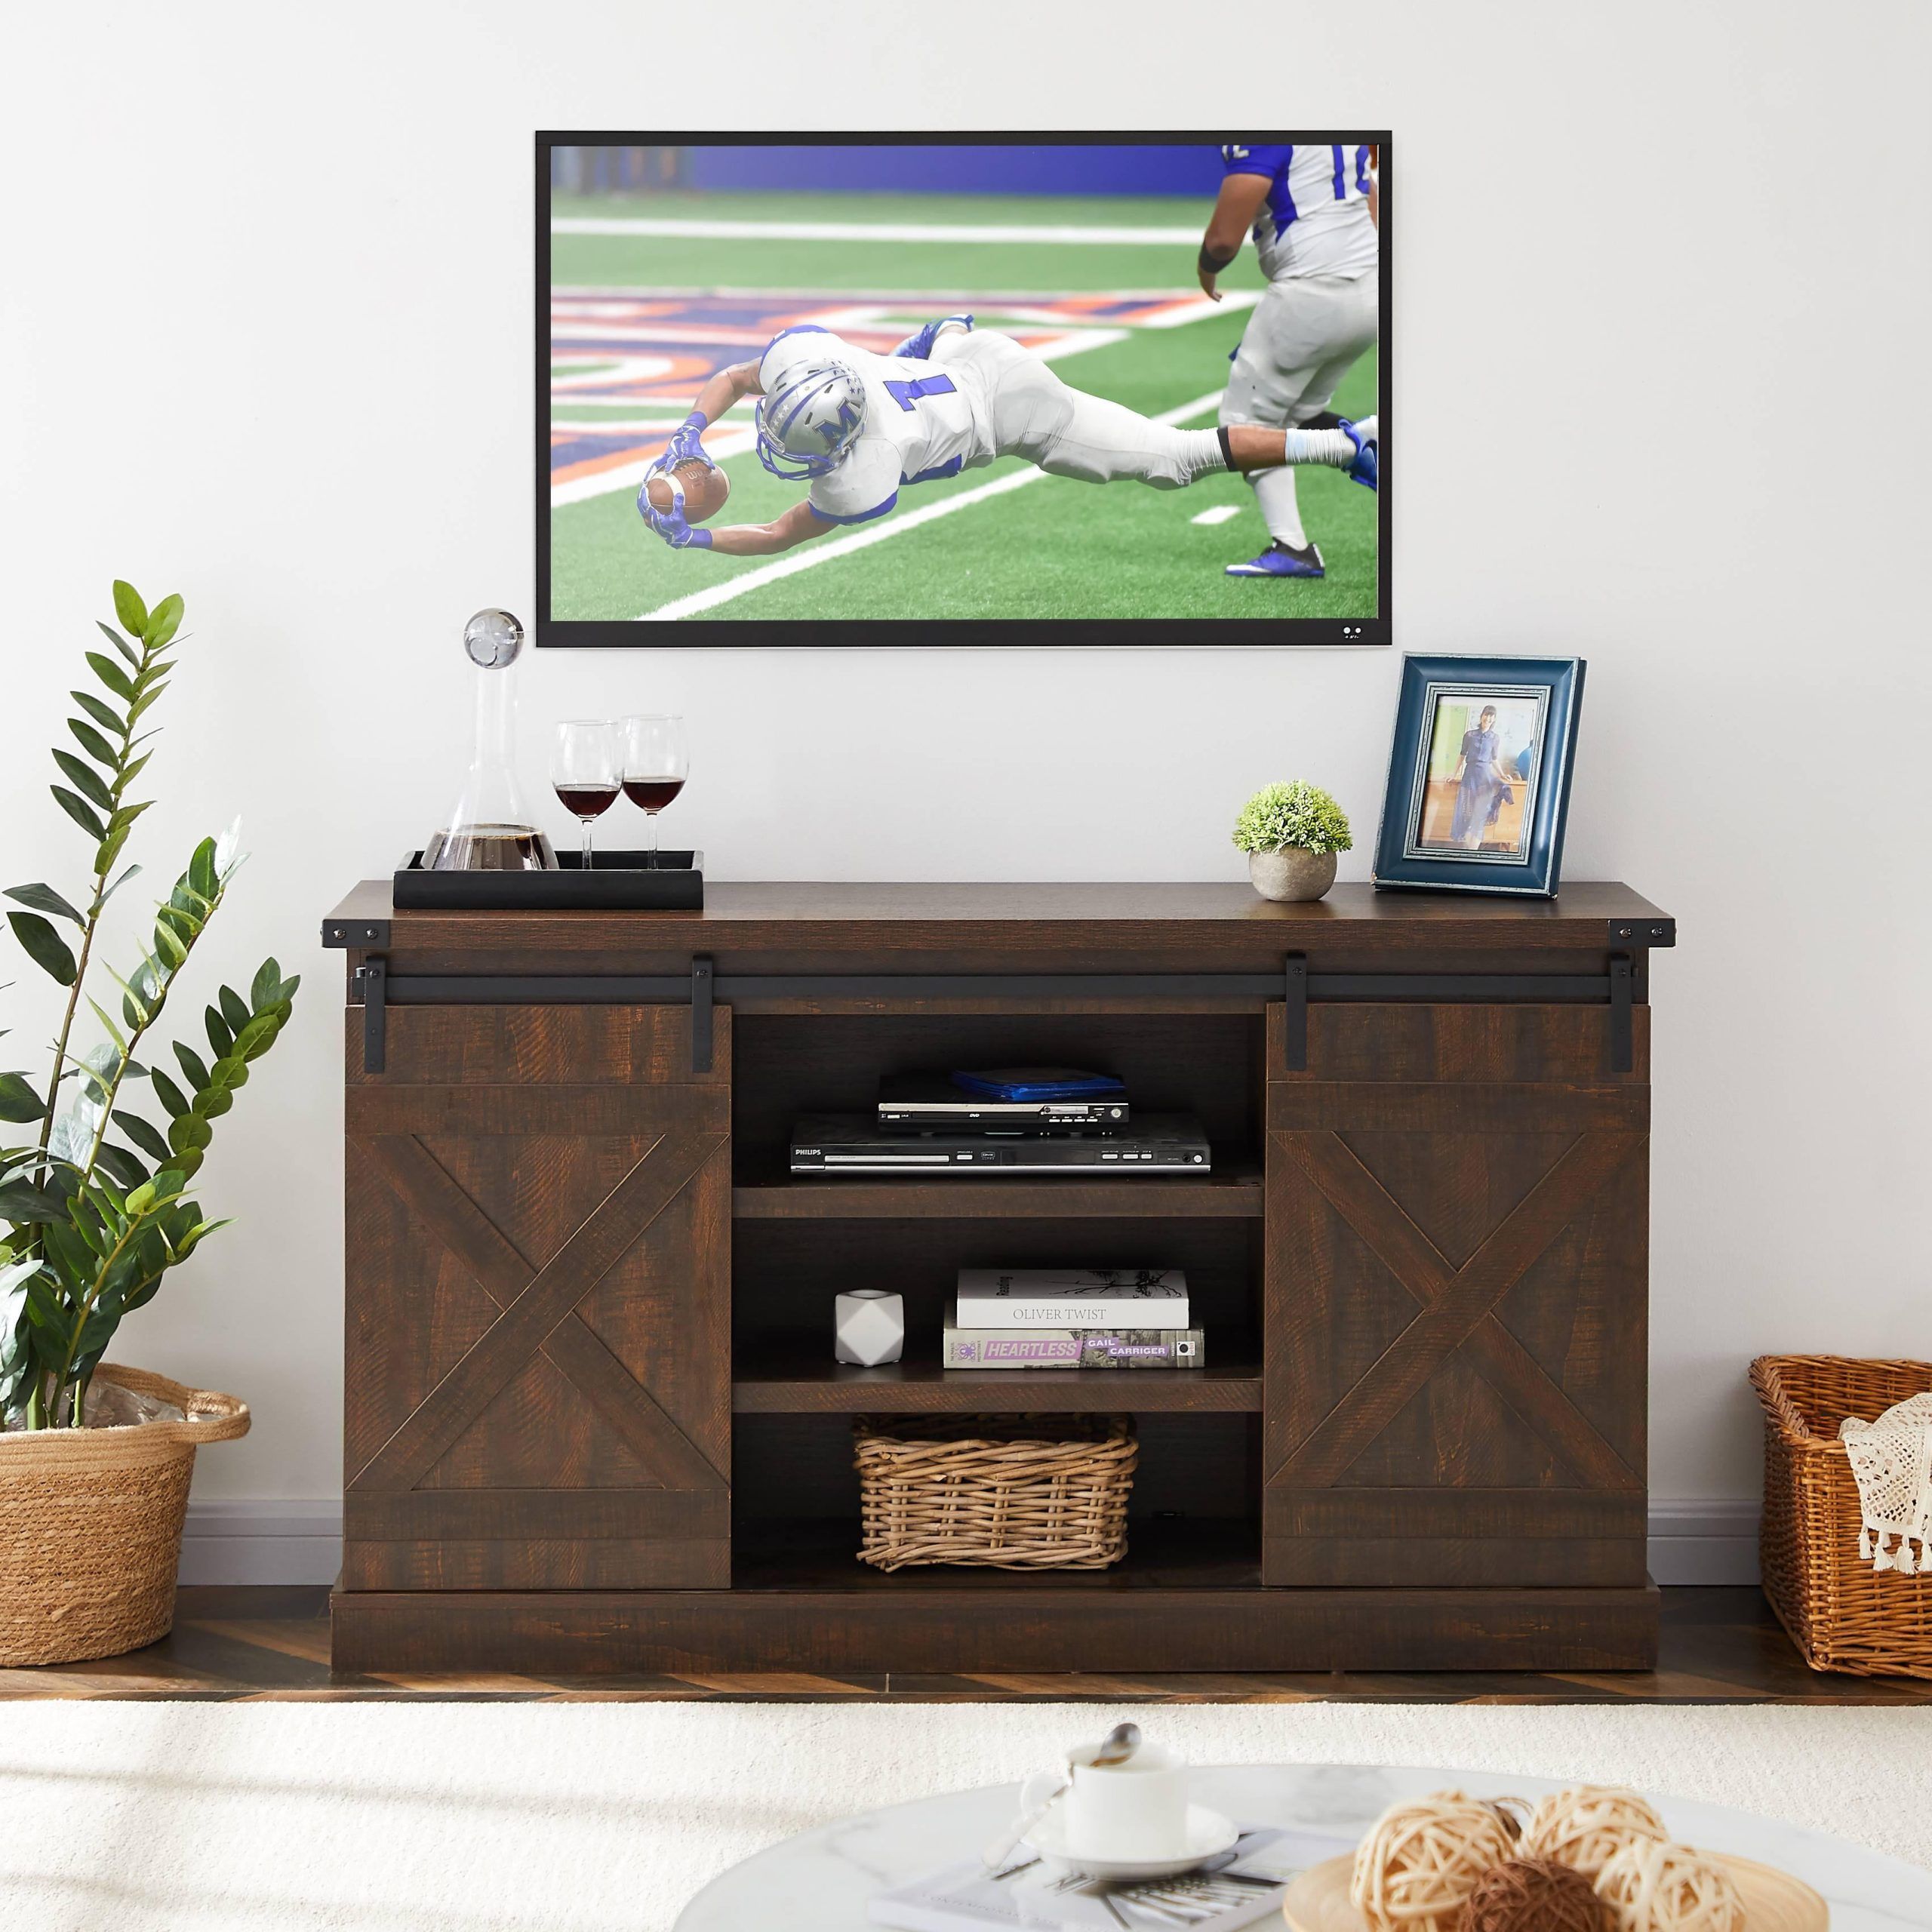 Sliding Barn Door Tv Cabinet With Storage Space And Shelf, Modern Inside Dual Use Storage Cabinet Tv Stands (View 15 of 20)